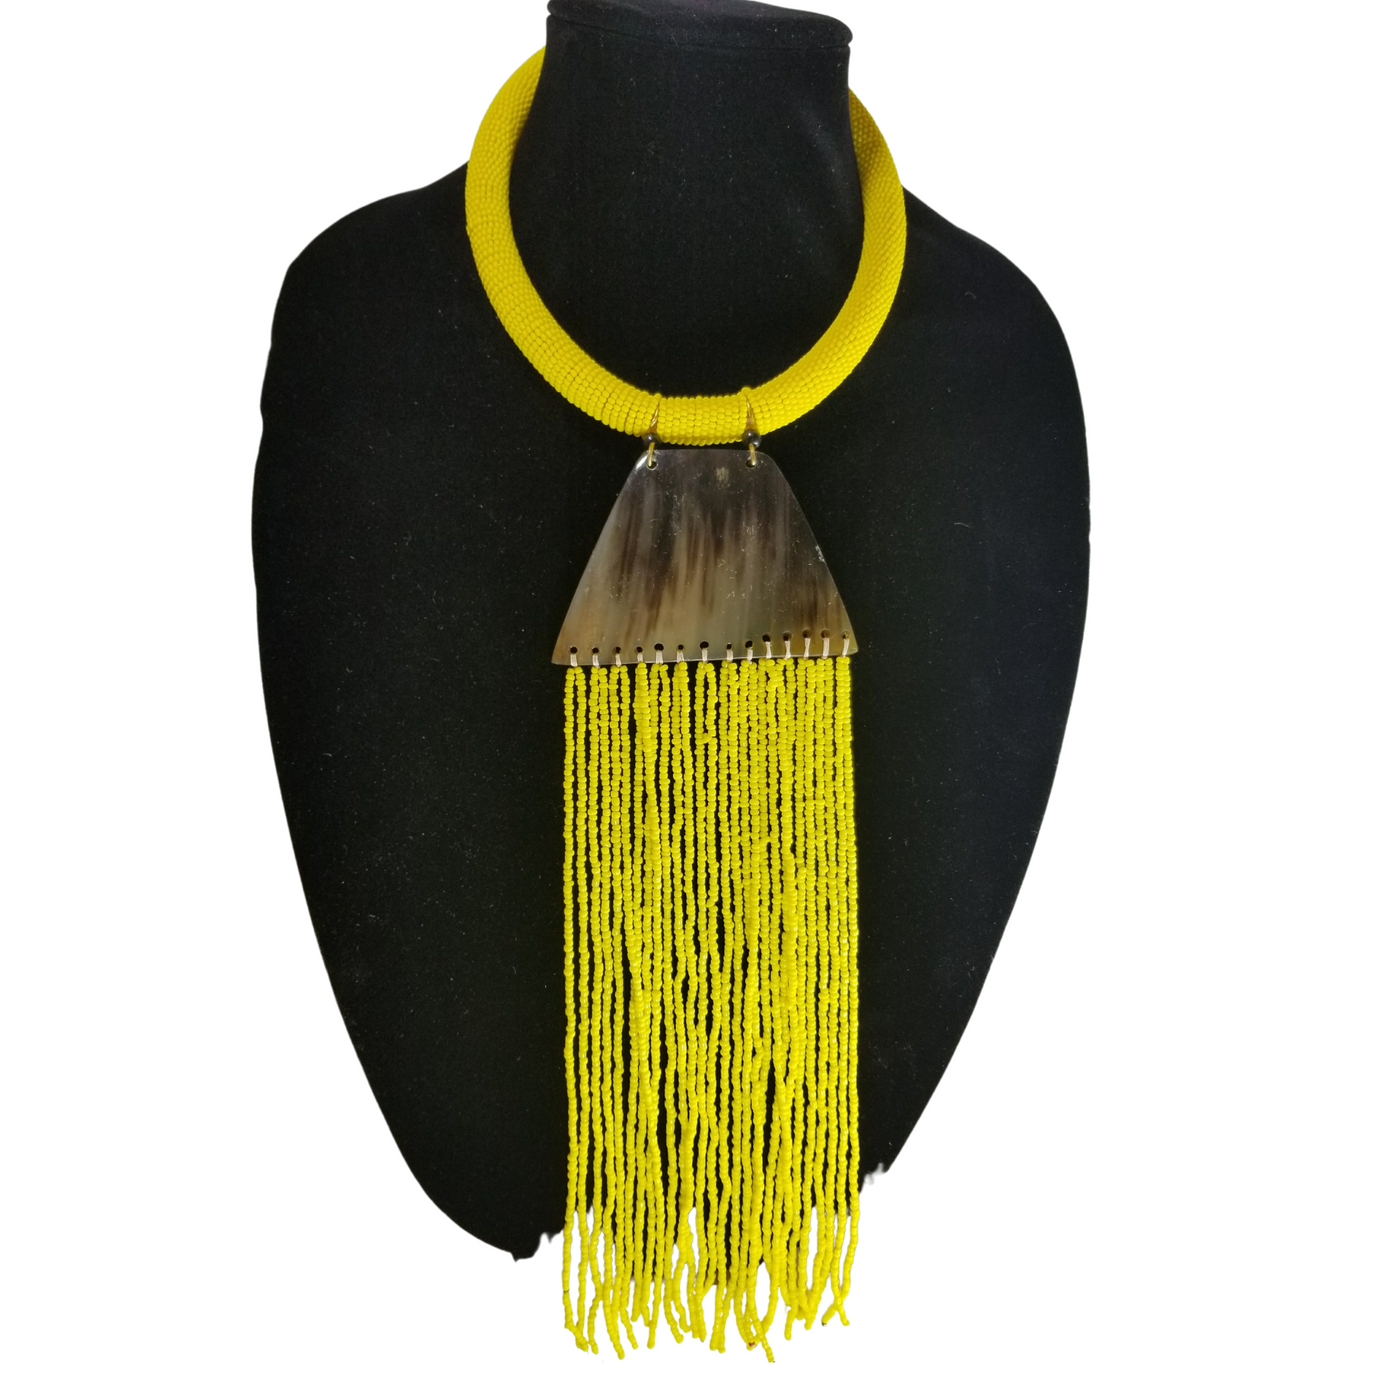 Beads and Bone Necklace, Yellow